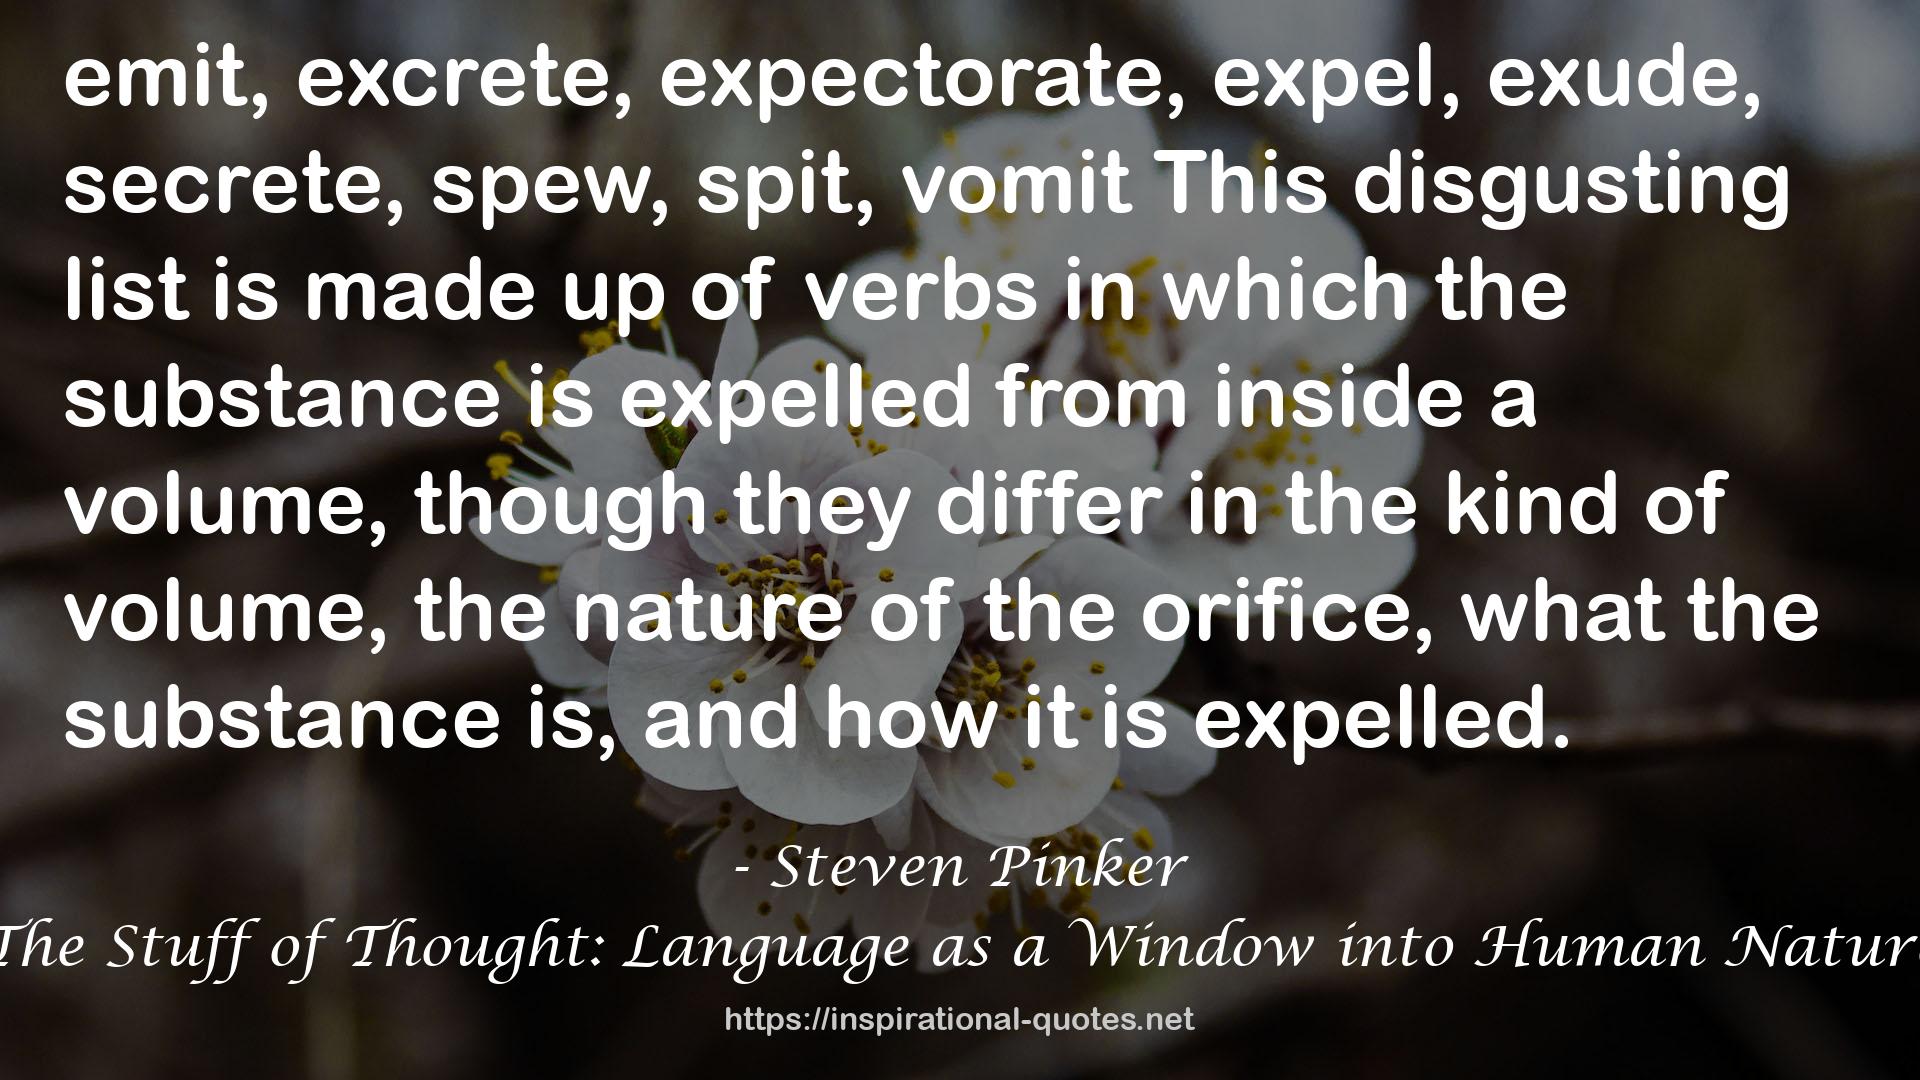 The Stuff of Thought: Language as a Window into Human Nature QUOTES